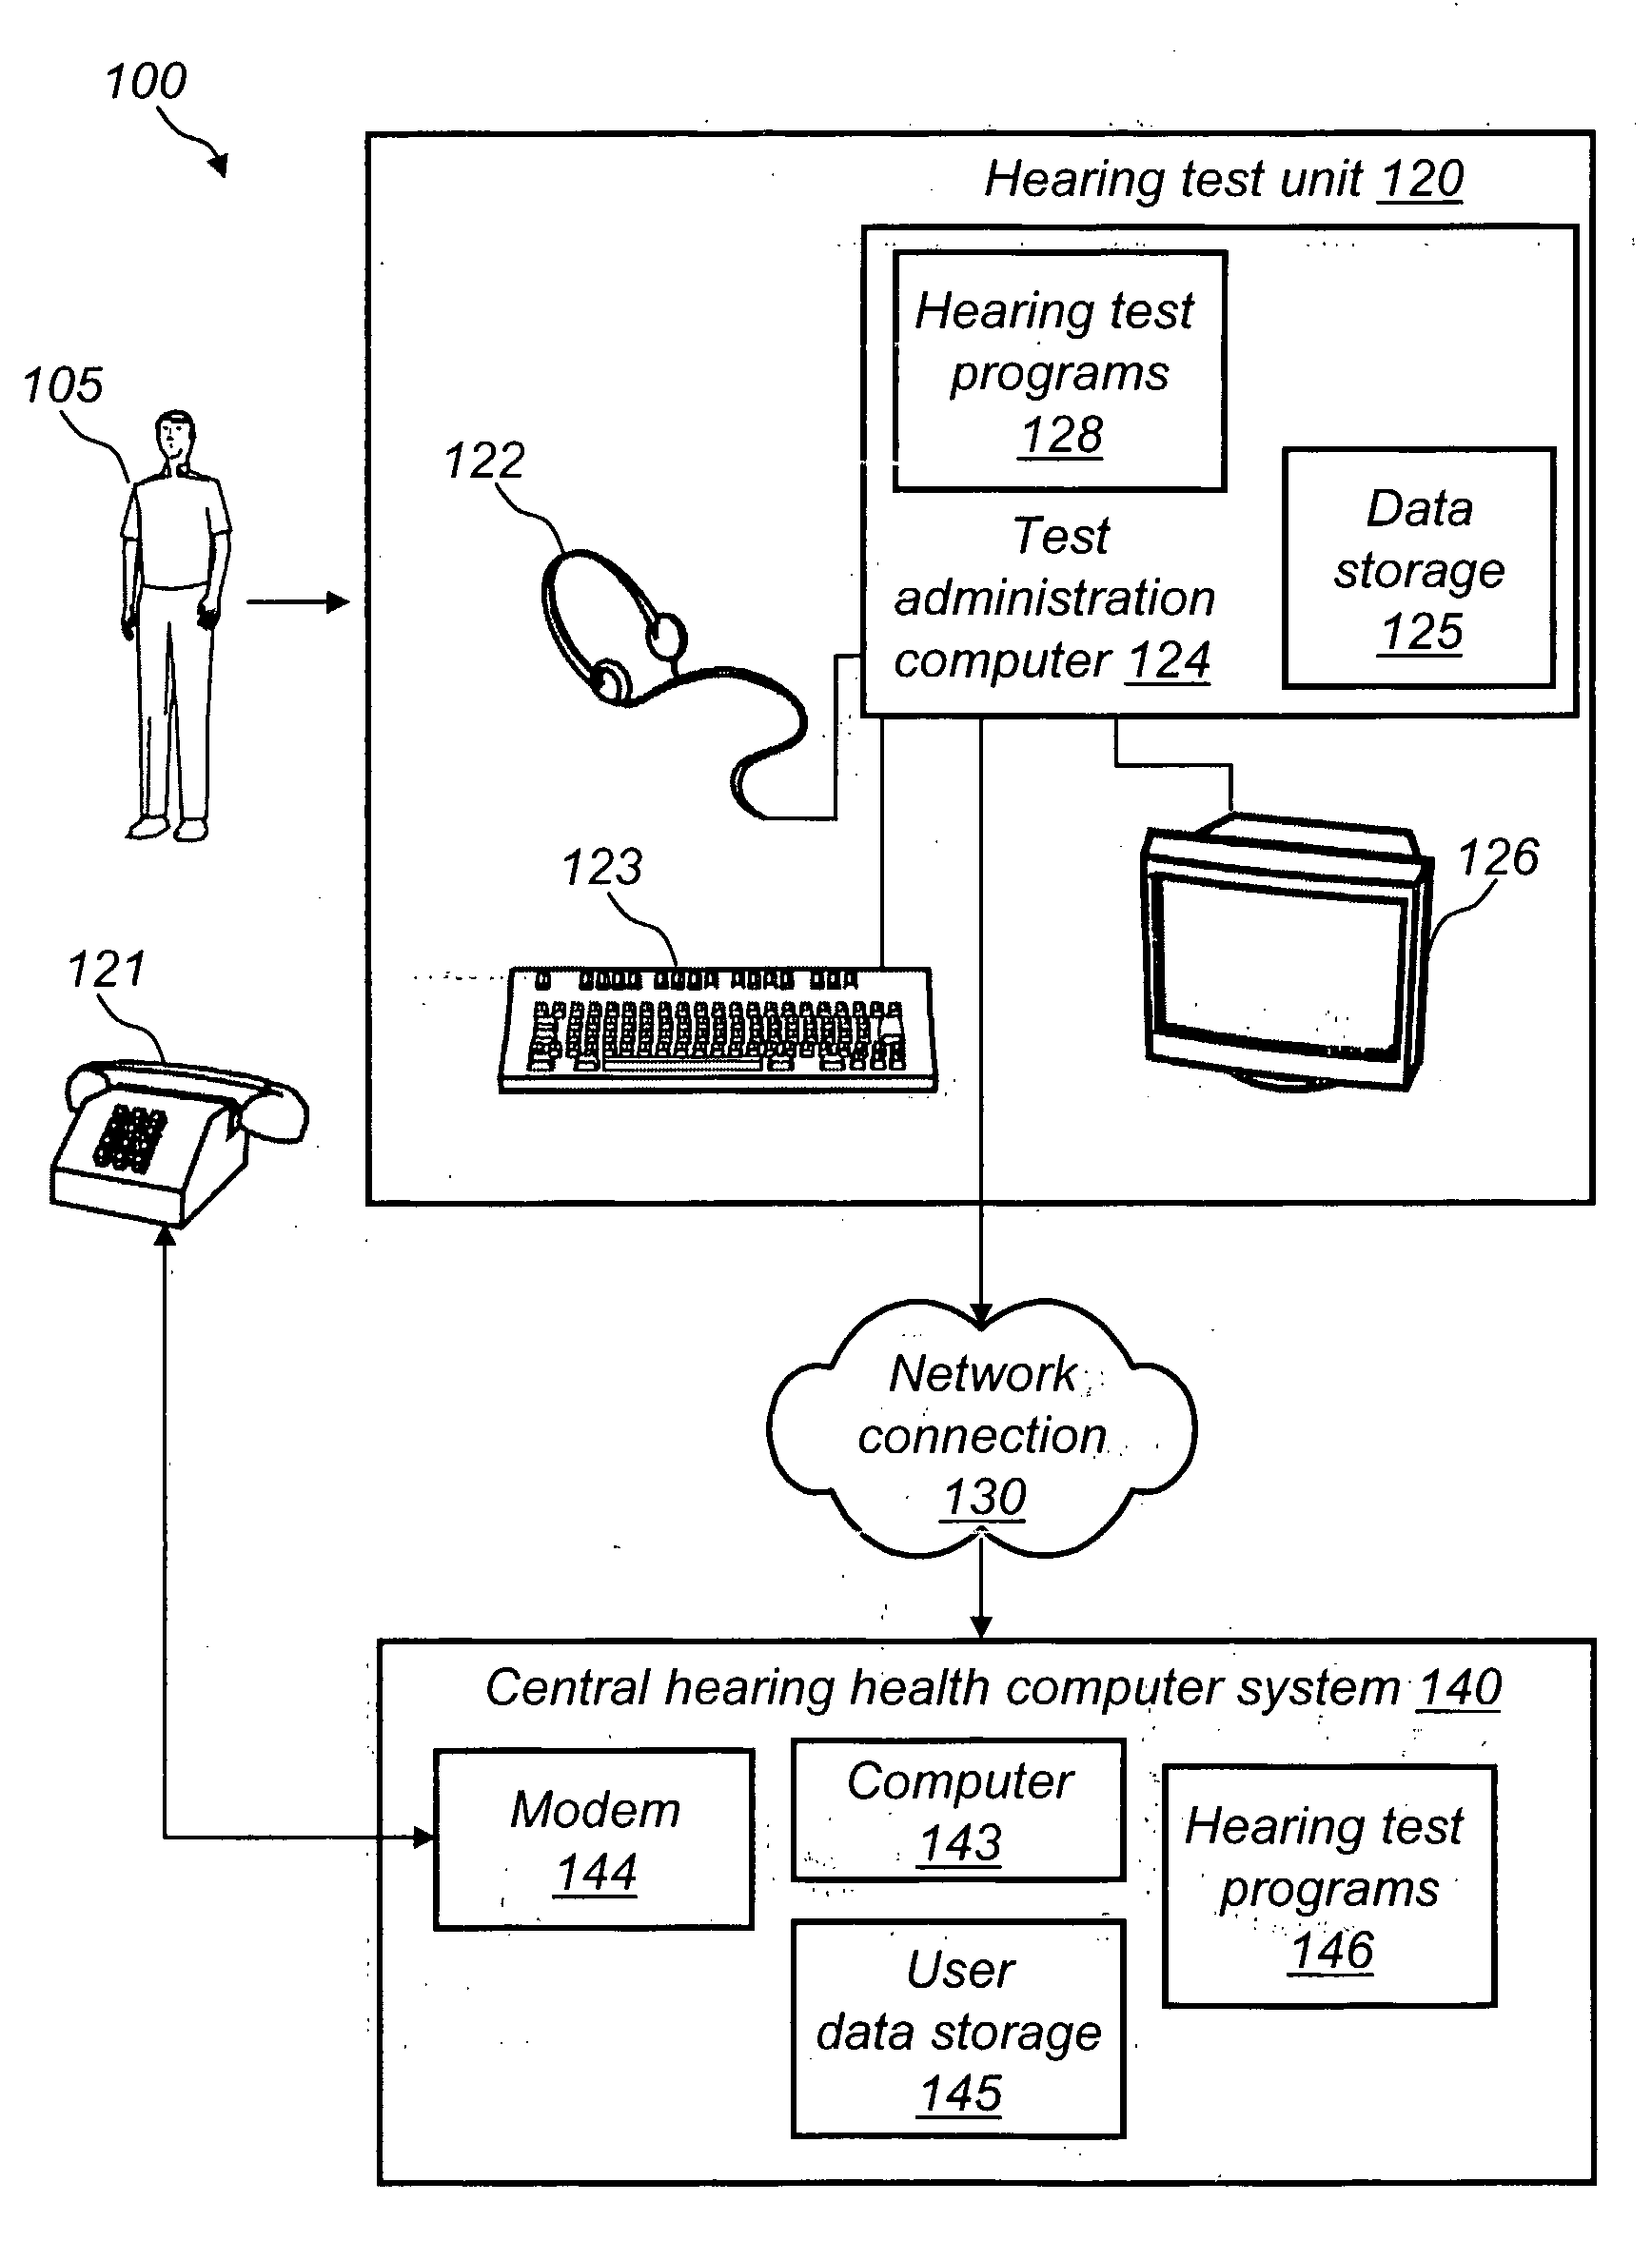 System for and Method of Conveniently and Automatically Testing the Hearing of a Person